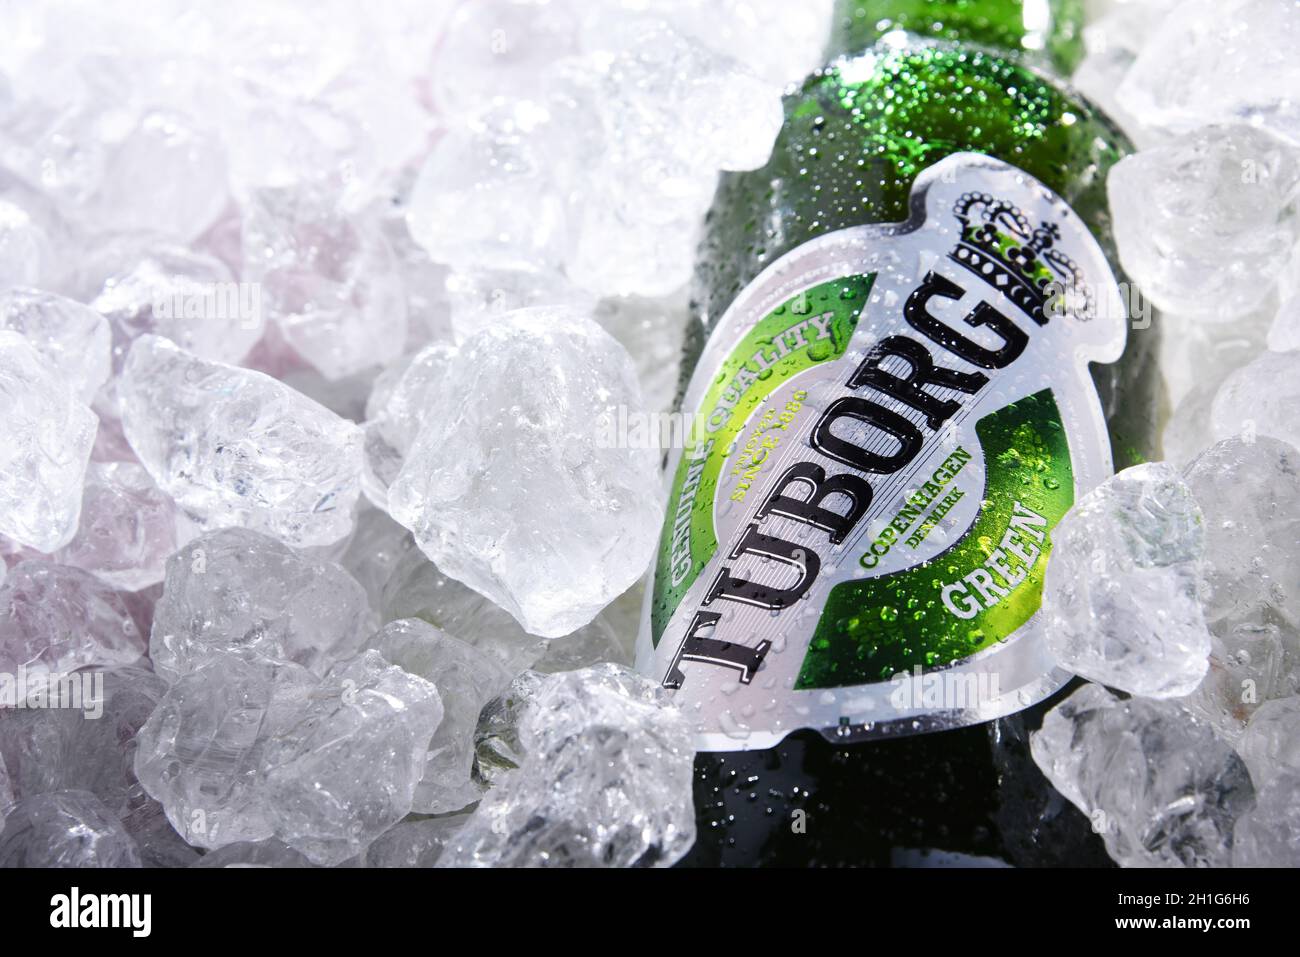 POZNAN, POL - JUN 10, 2020:  Bottle of Tuborg beer, produced by a Danish brewing company founded in 1873 near Copenhagen Stock Photo